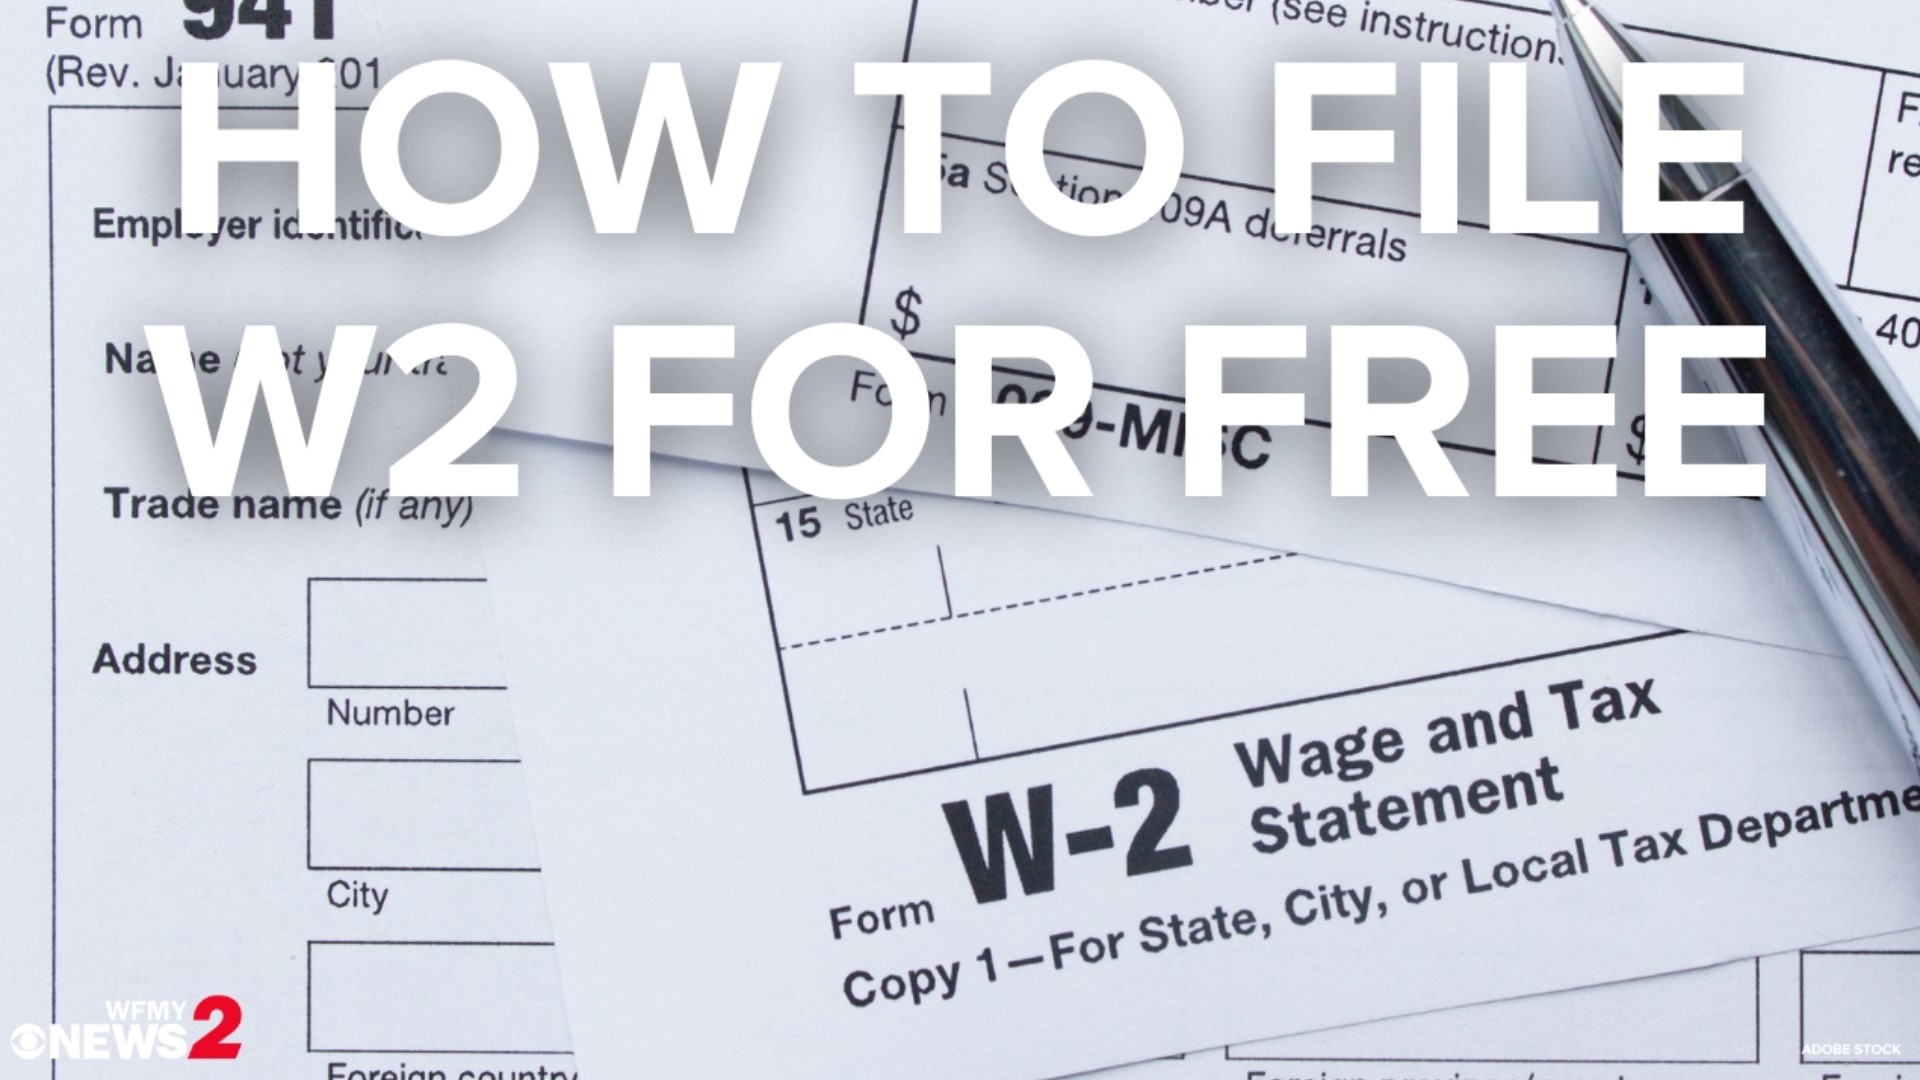 January 31 is the deadline for employers to give out W-2 forms. The deadline to file is April 18.